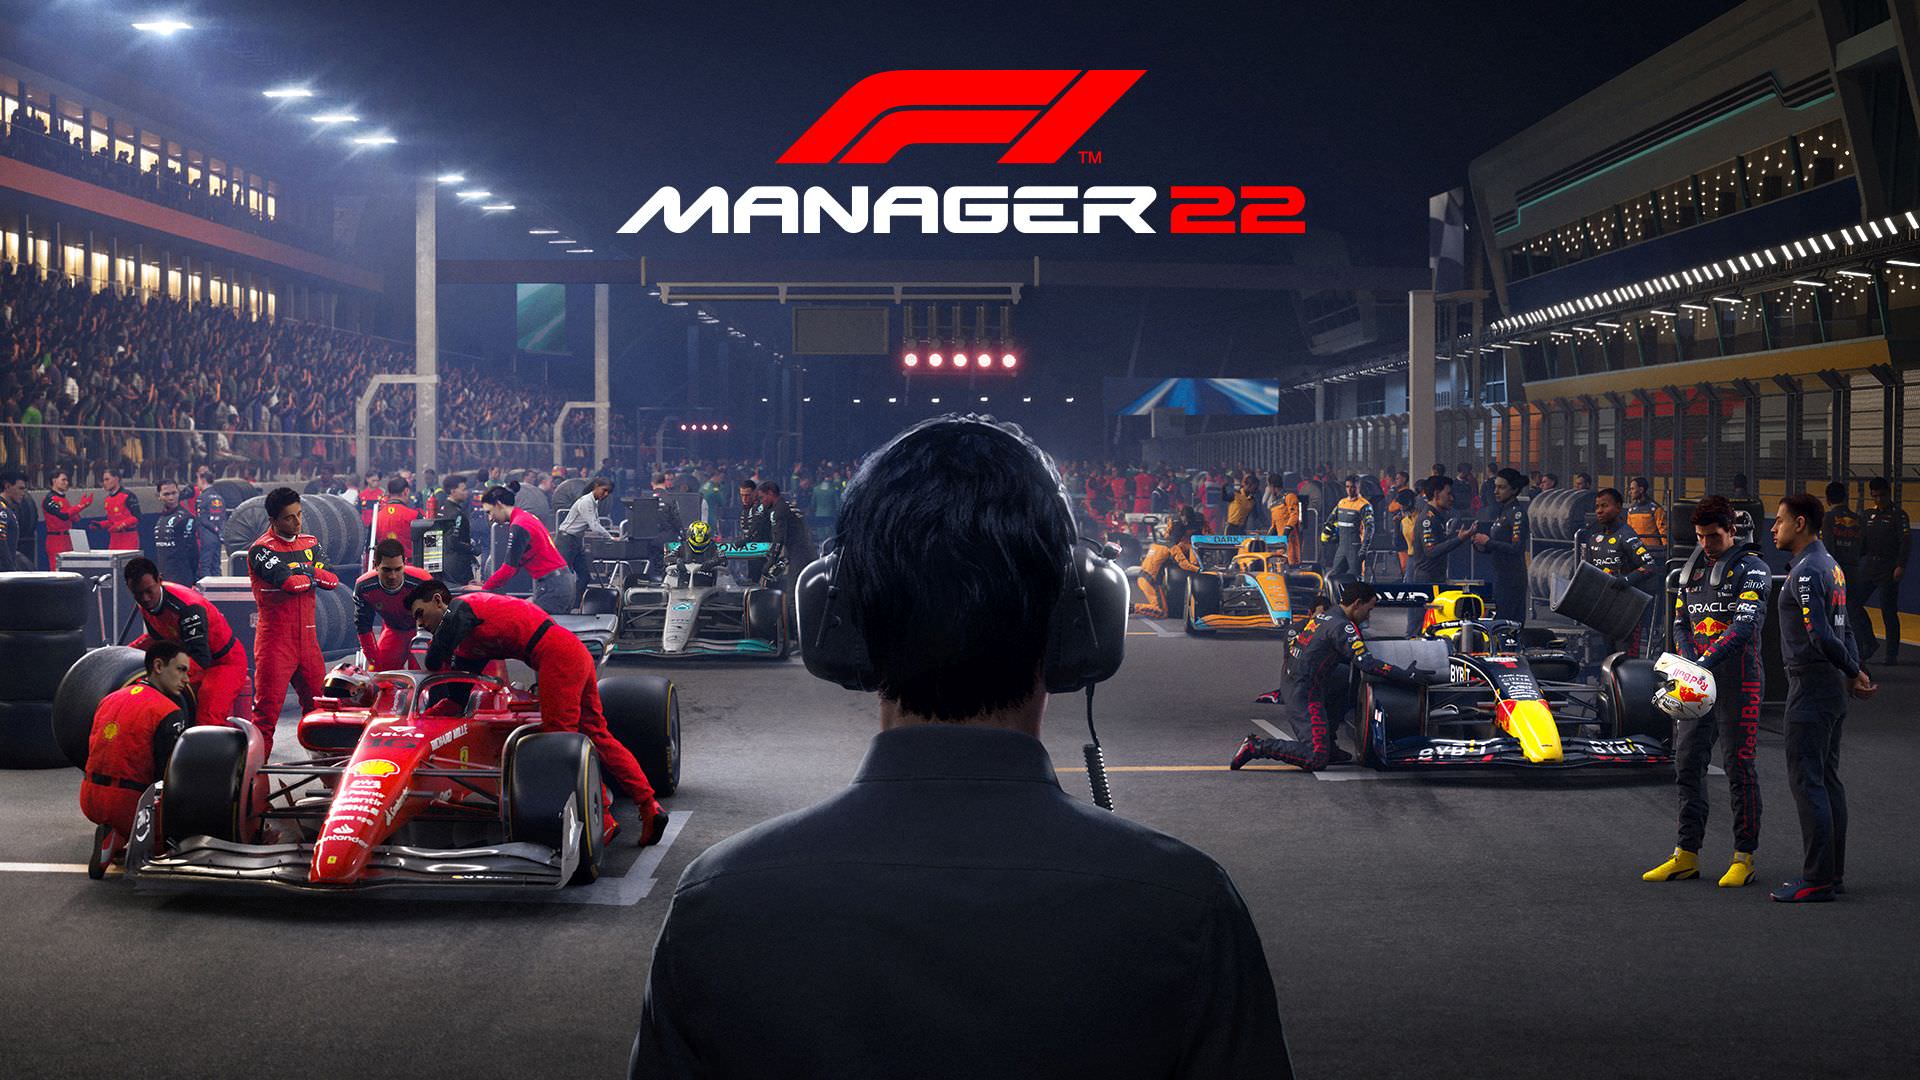 f1 manager 2022  Image of f1 manager 2022